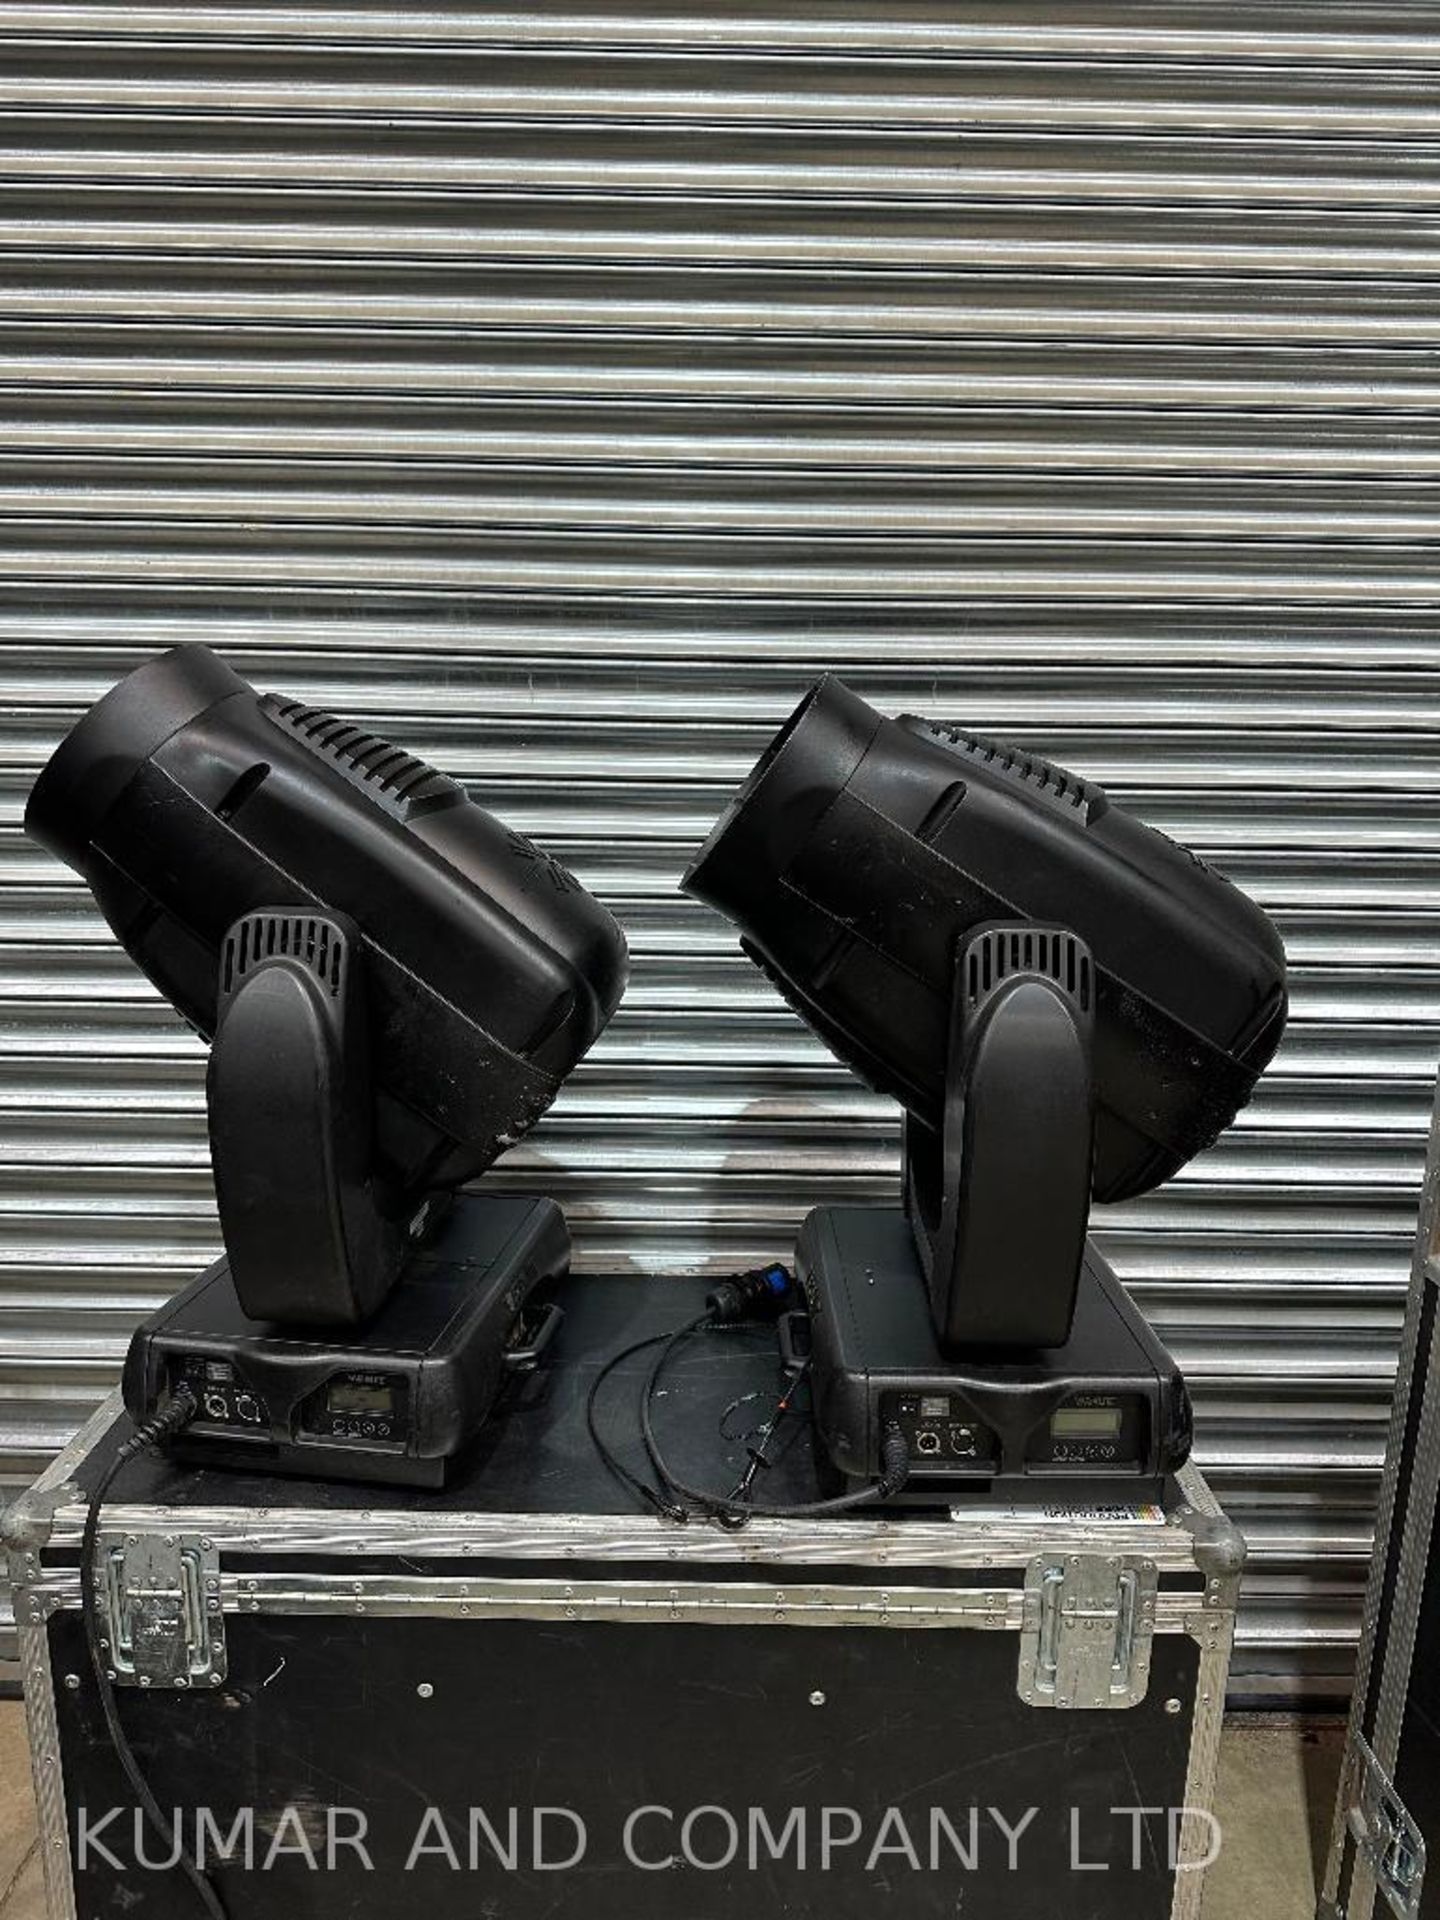 Varilite VL3500 Wash FX -Sold as a Pair in a flightcase. - The VL3500 Wash FX luminaire features int - Image 3 of 4